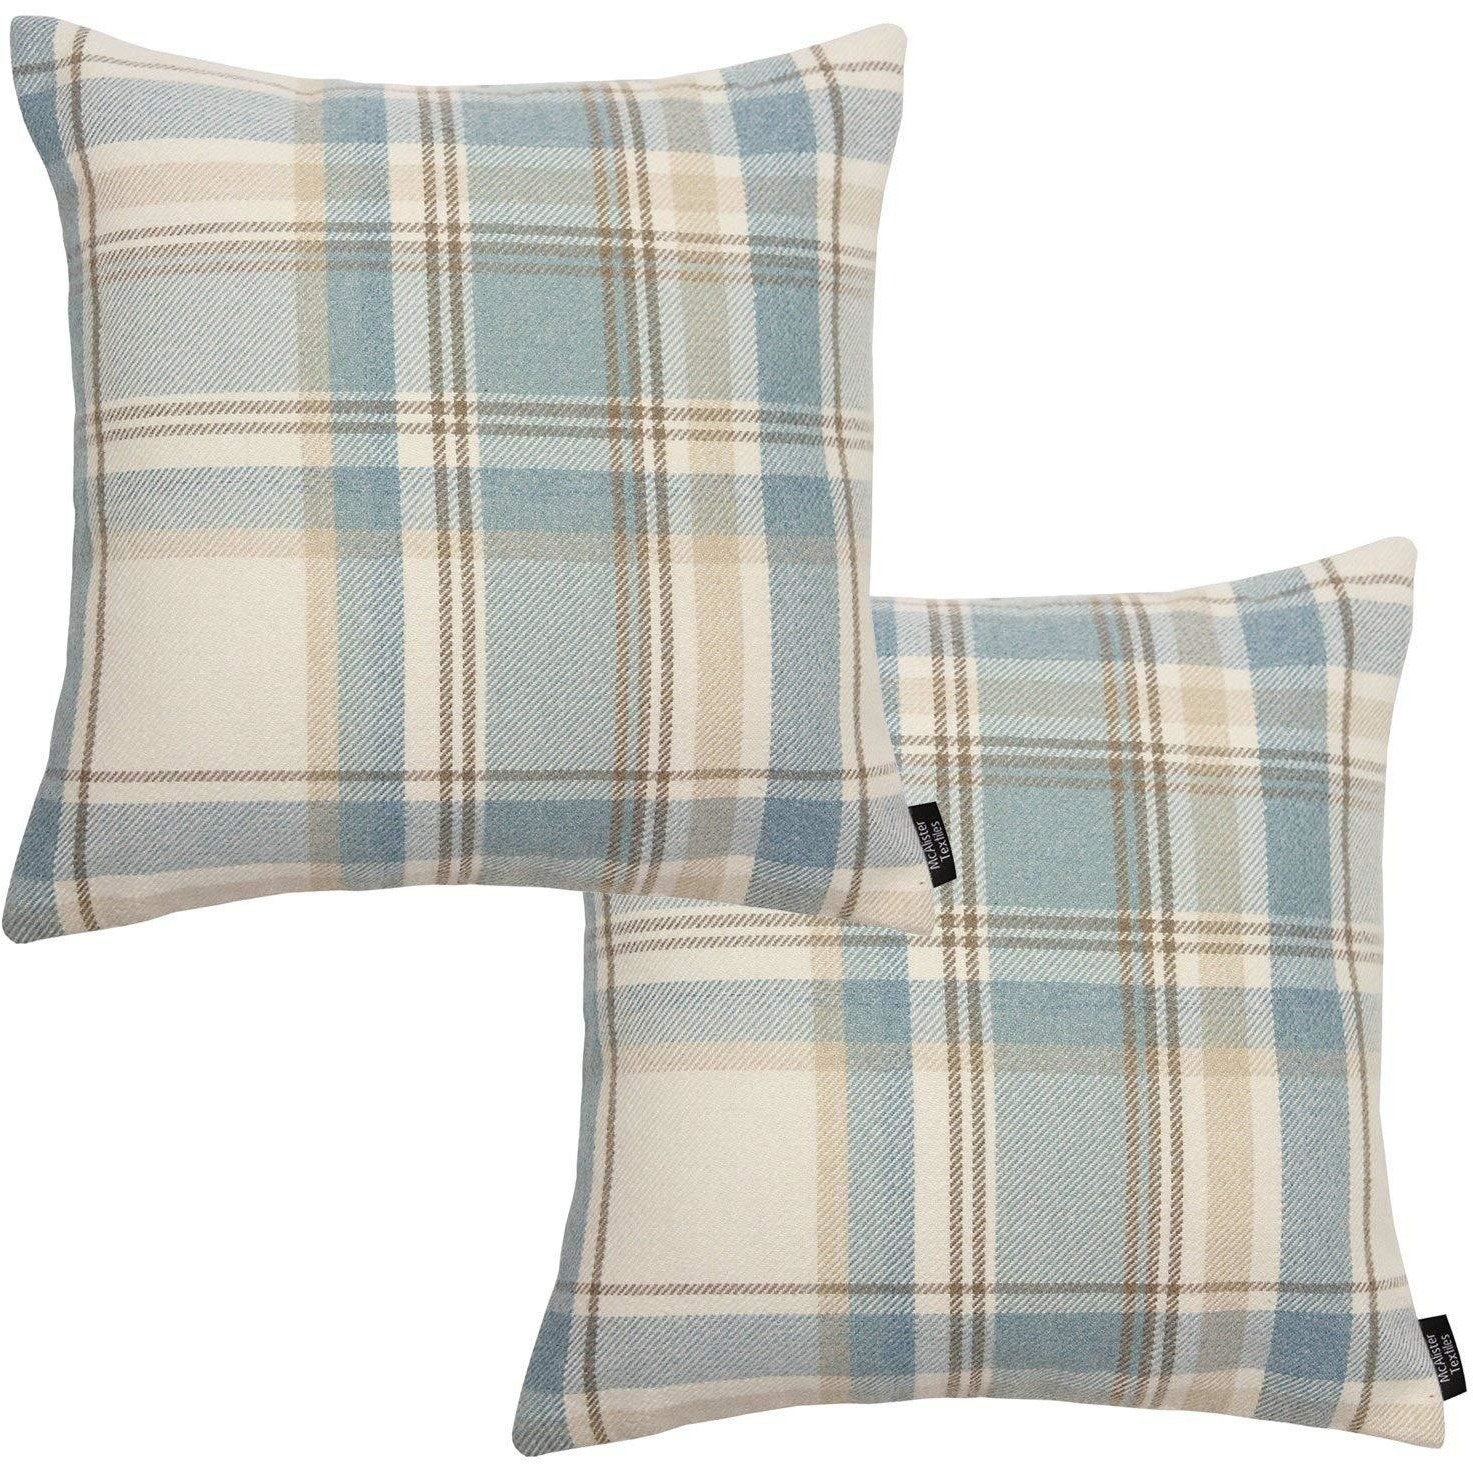 McAlister Textiles Heritage Duck Egg Blue Tartan 43cm x 43cm Cushion Sets Cushions and Covers Cushion Covers Set of 2 